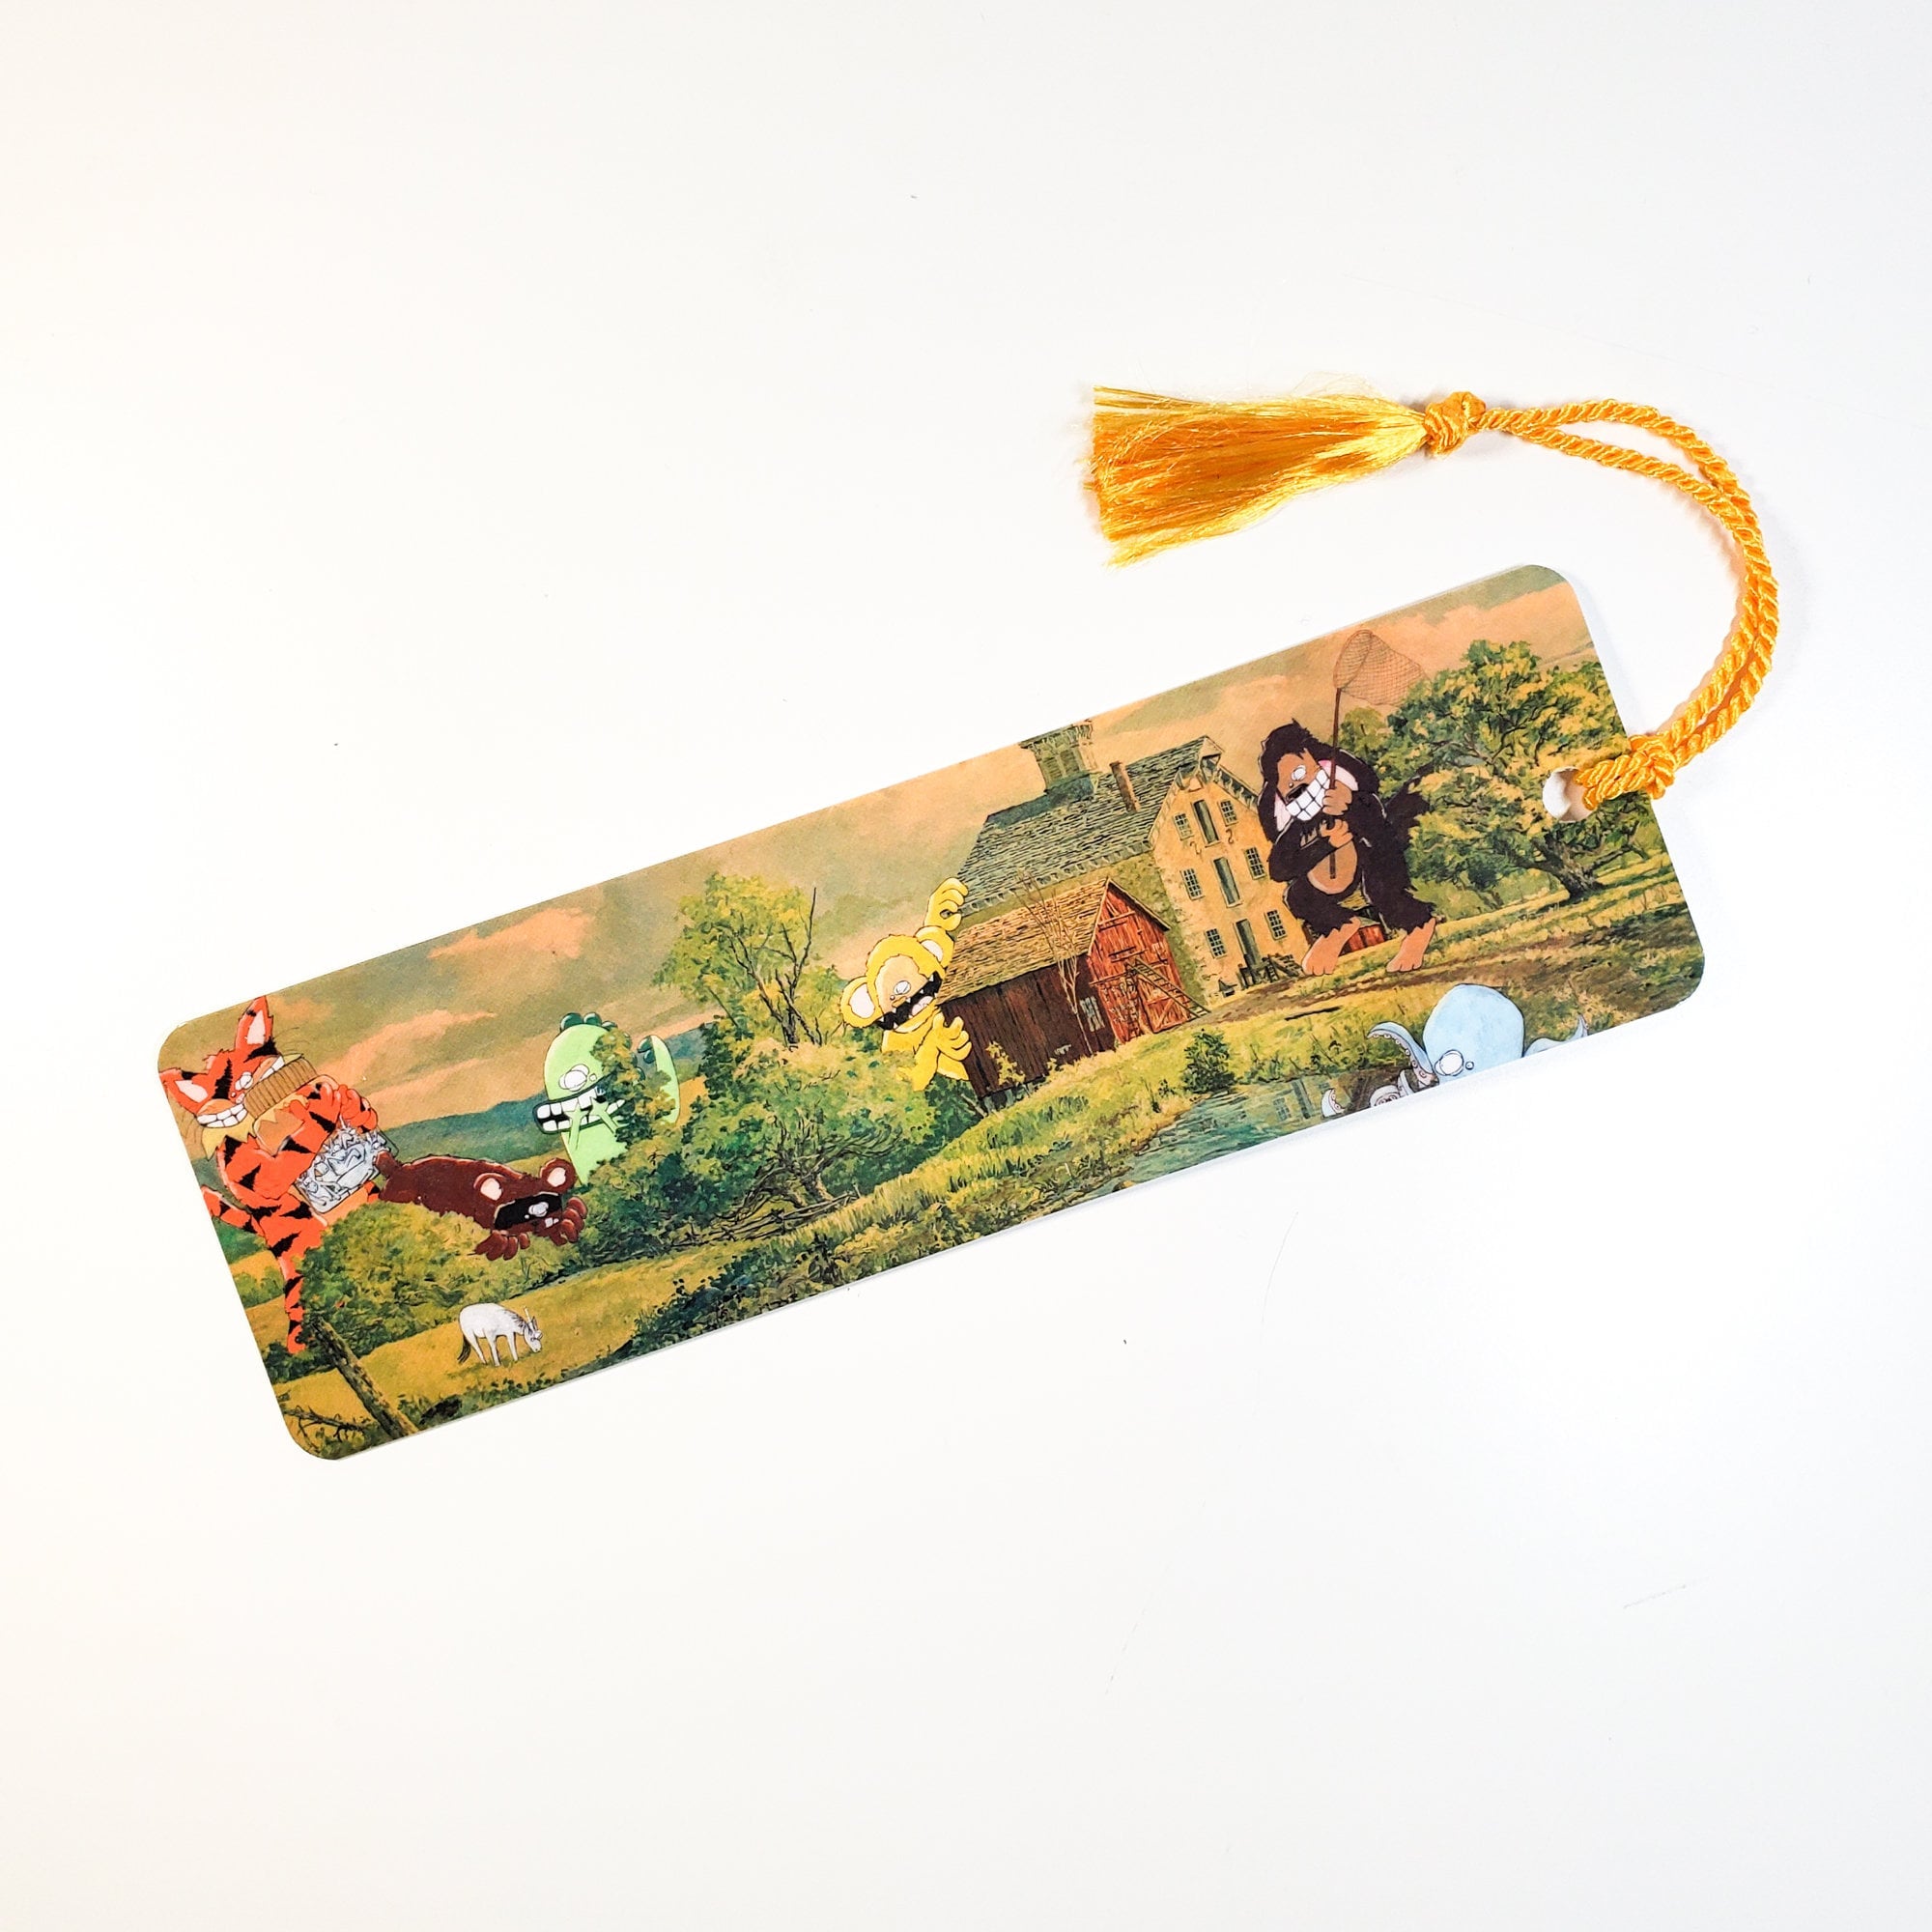 Collecting - Leroy's Place Bookmark